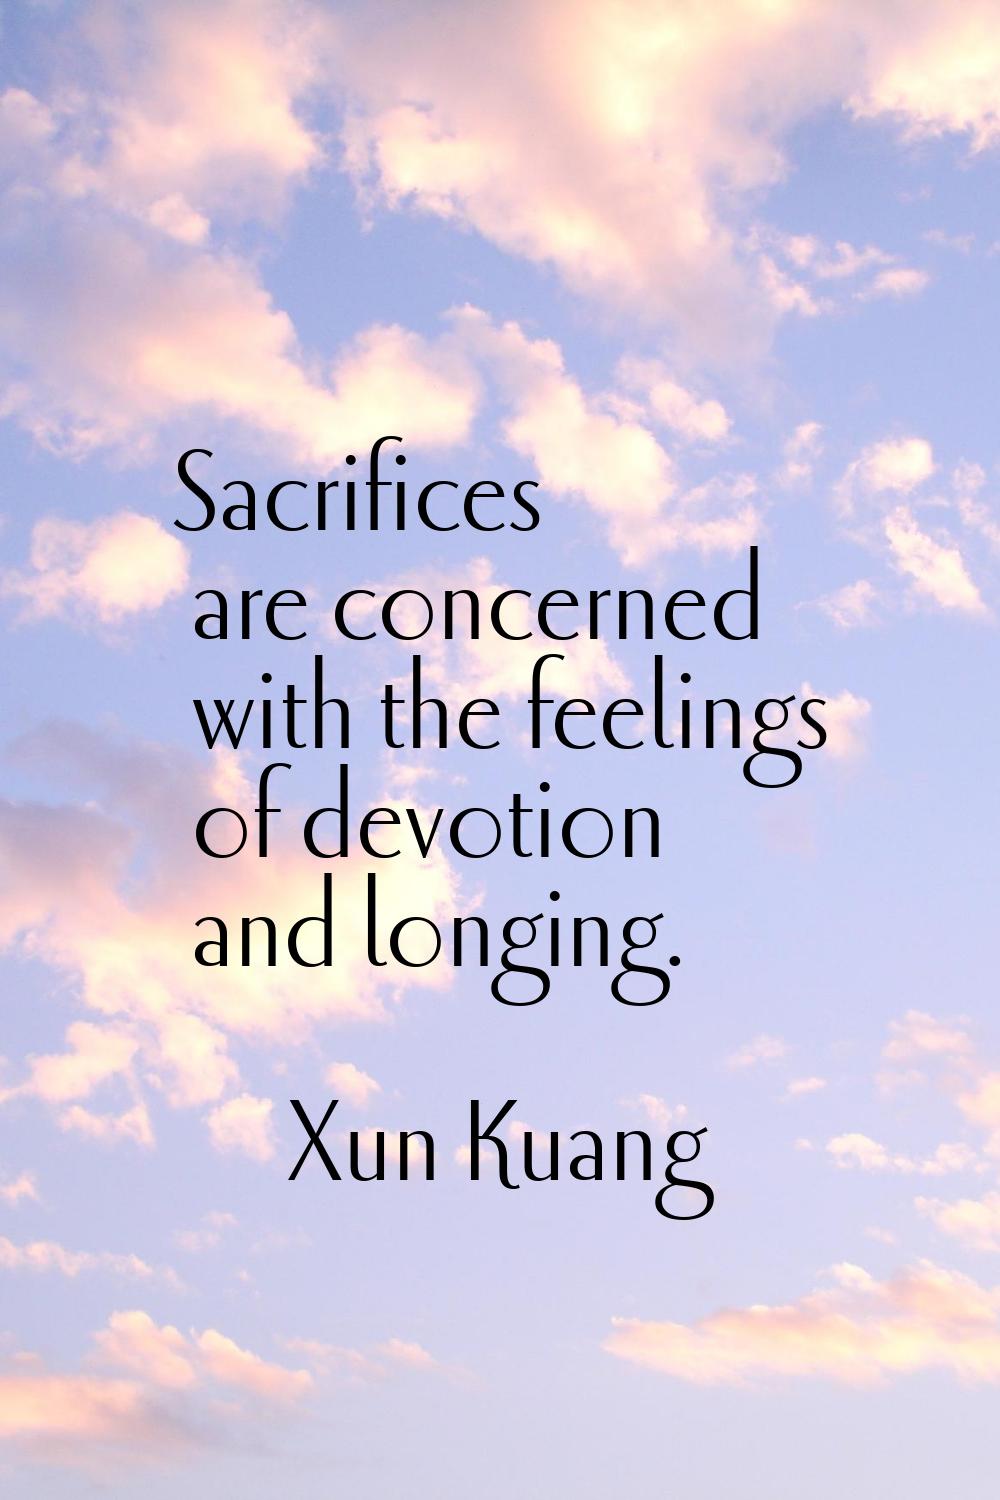 Sacrifices are concerned with the feelings of devotion and longing.